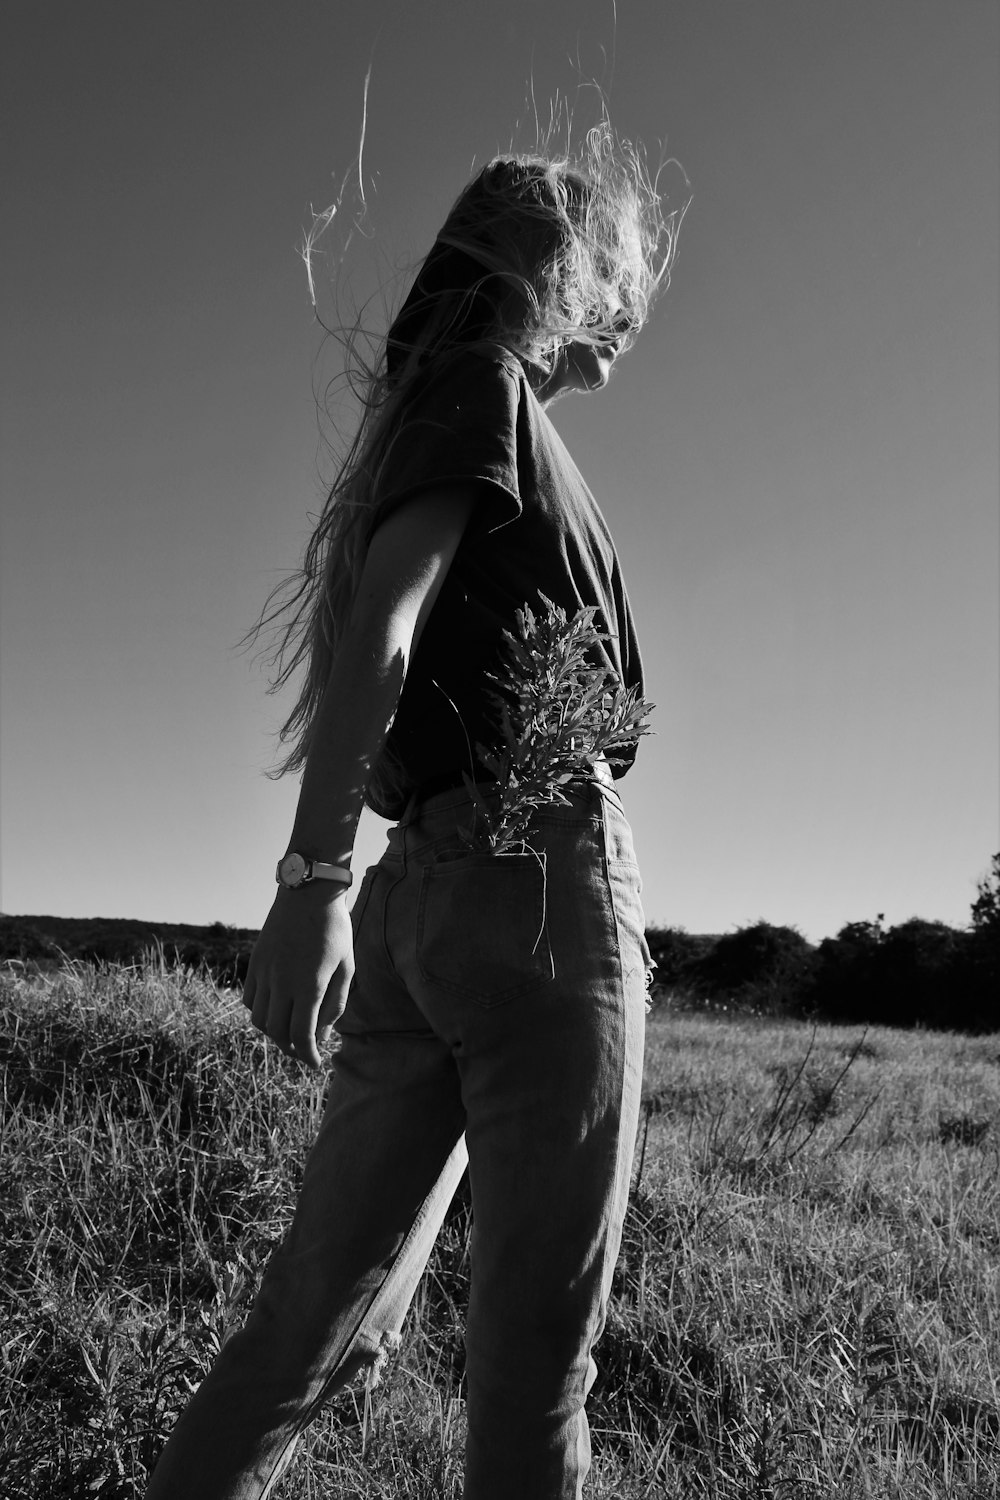 grayscale photo of woman in black tank top and pants standing on grass field